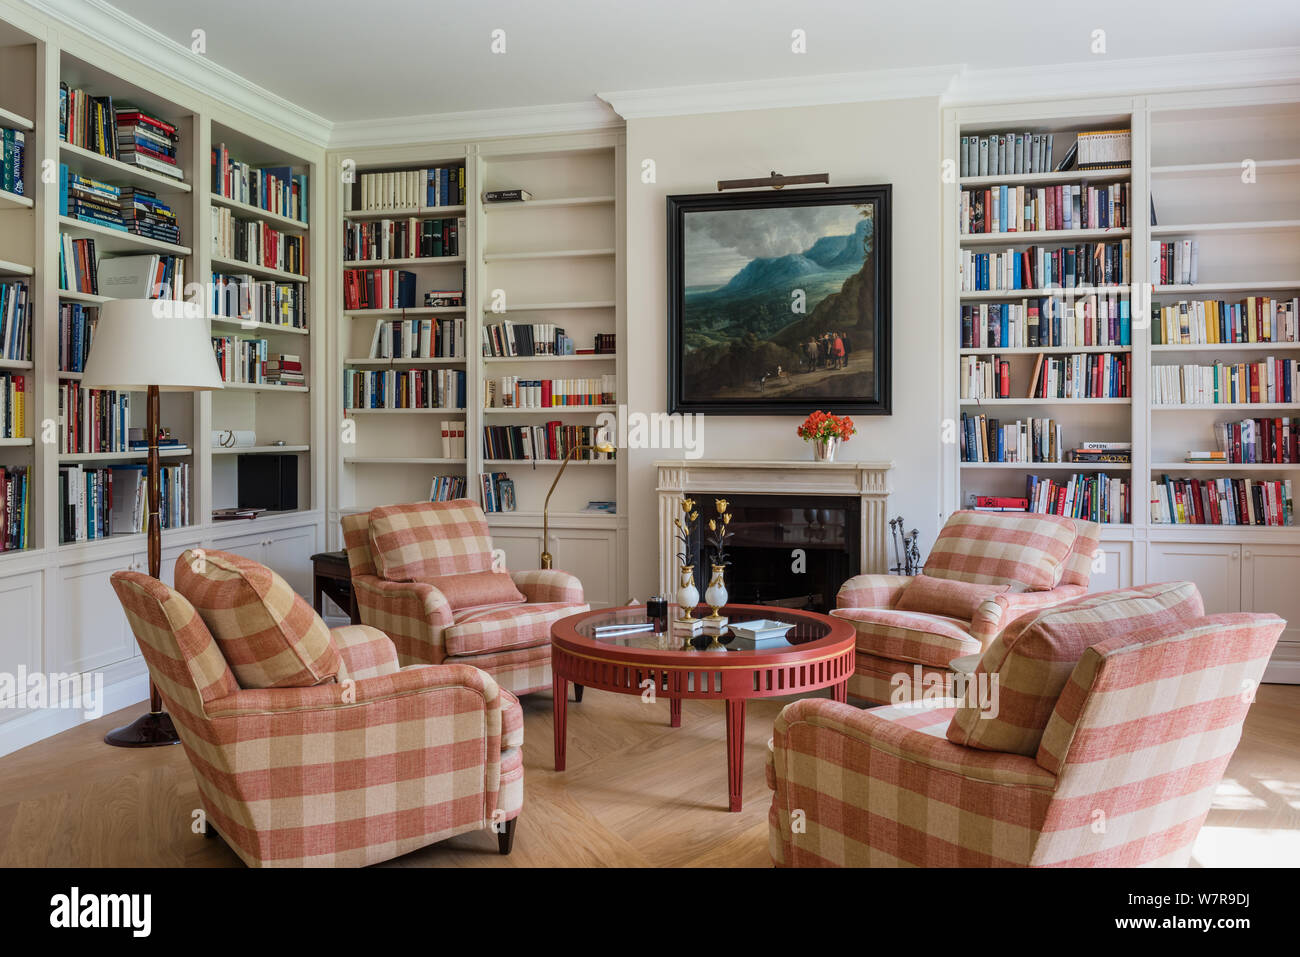 Country Style Living Room With Checked Armchairs Stock Photo Alamy